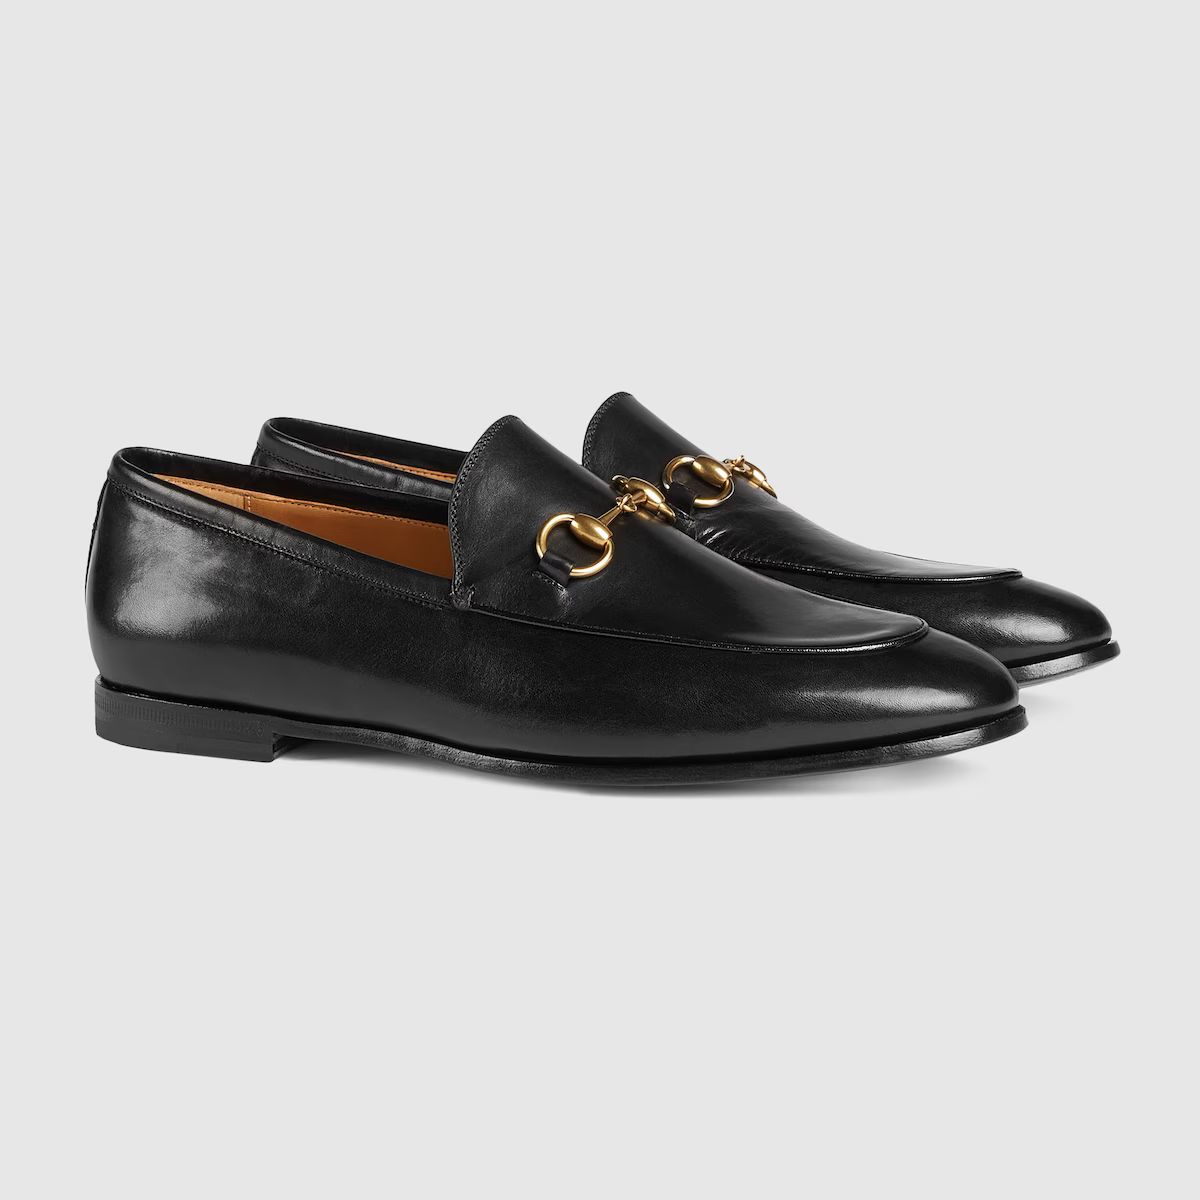 Gucci - Gucci Jordaan leather loafer | Gucci (UK)